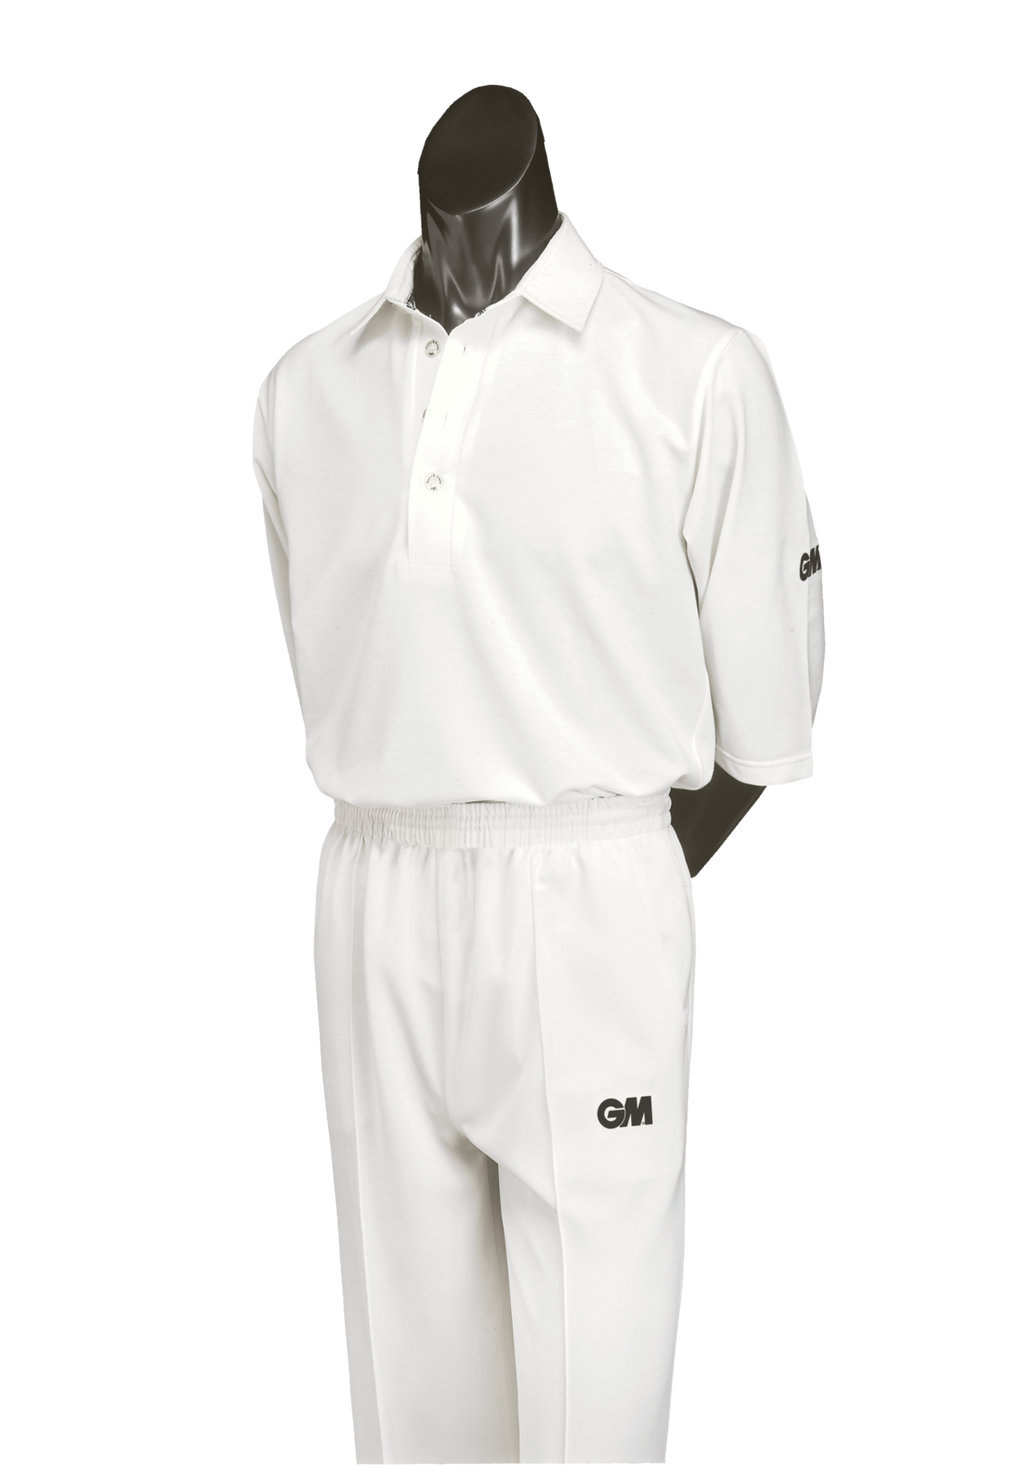 Cricket Trousers and Shirts Popular Options For Test Matches   Times of  India